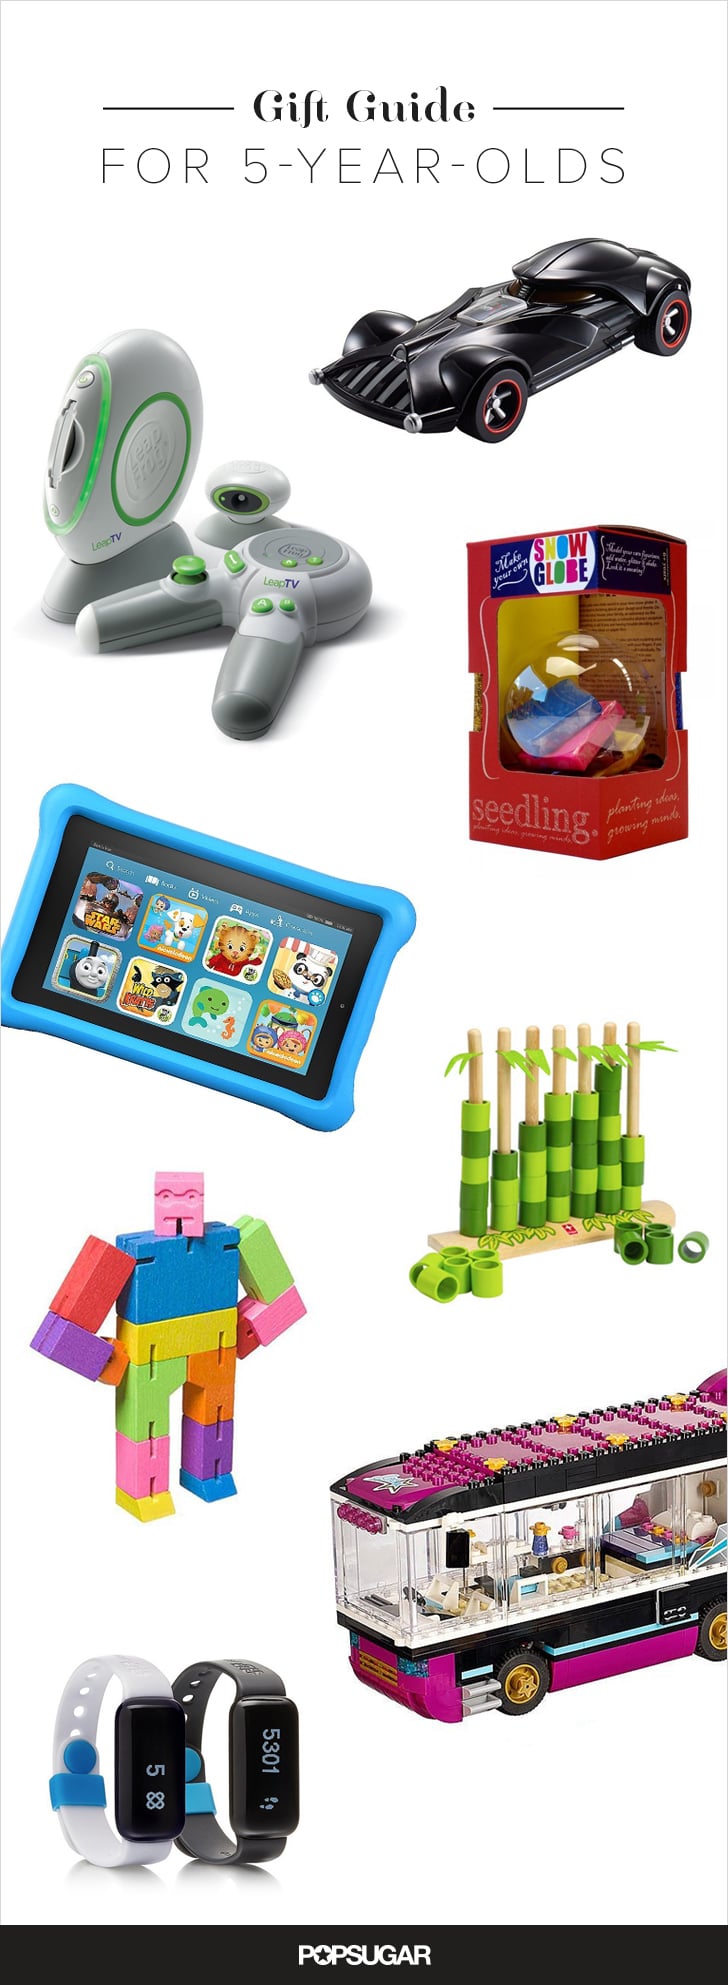 Gift Guide For 5-Year-Olds | POPSUGAR Moms Photo 57